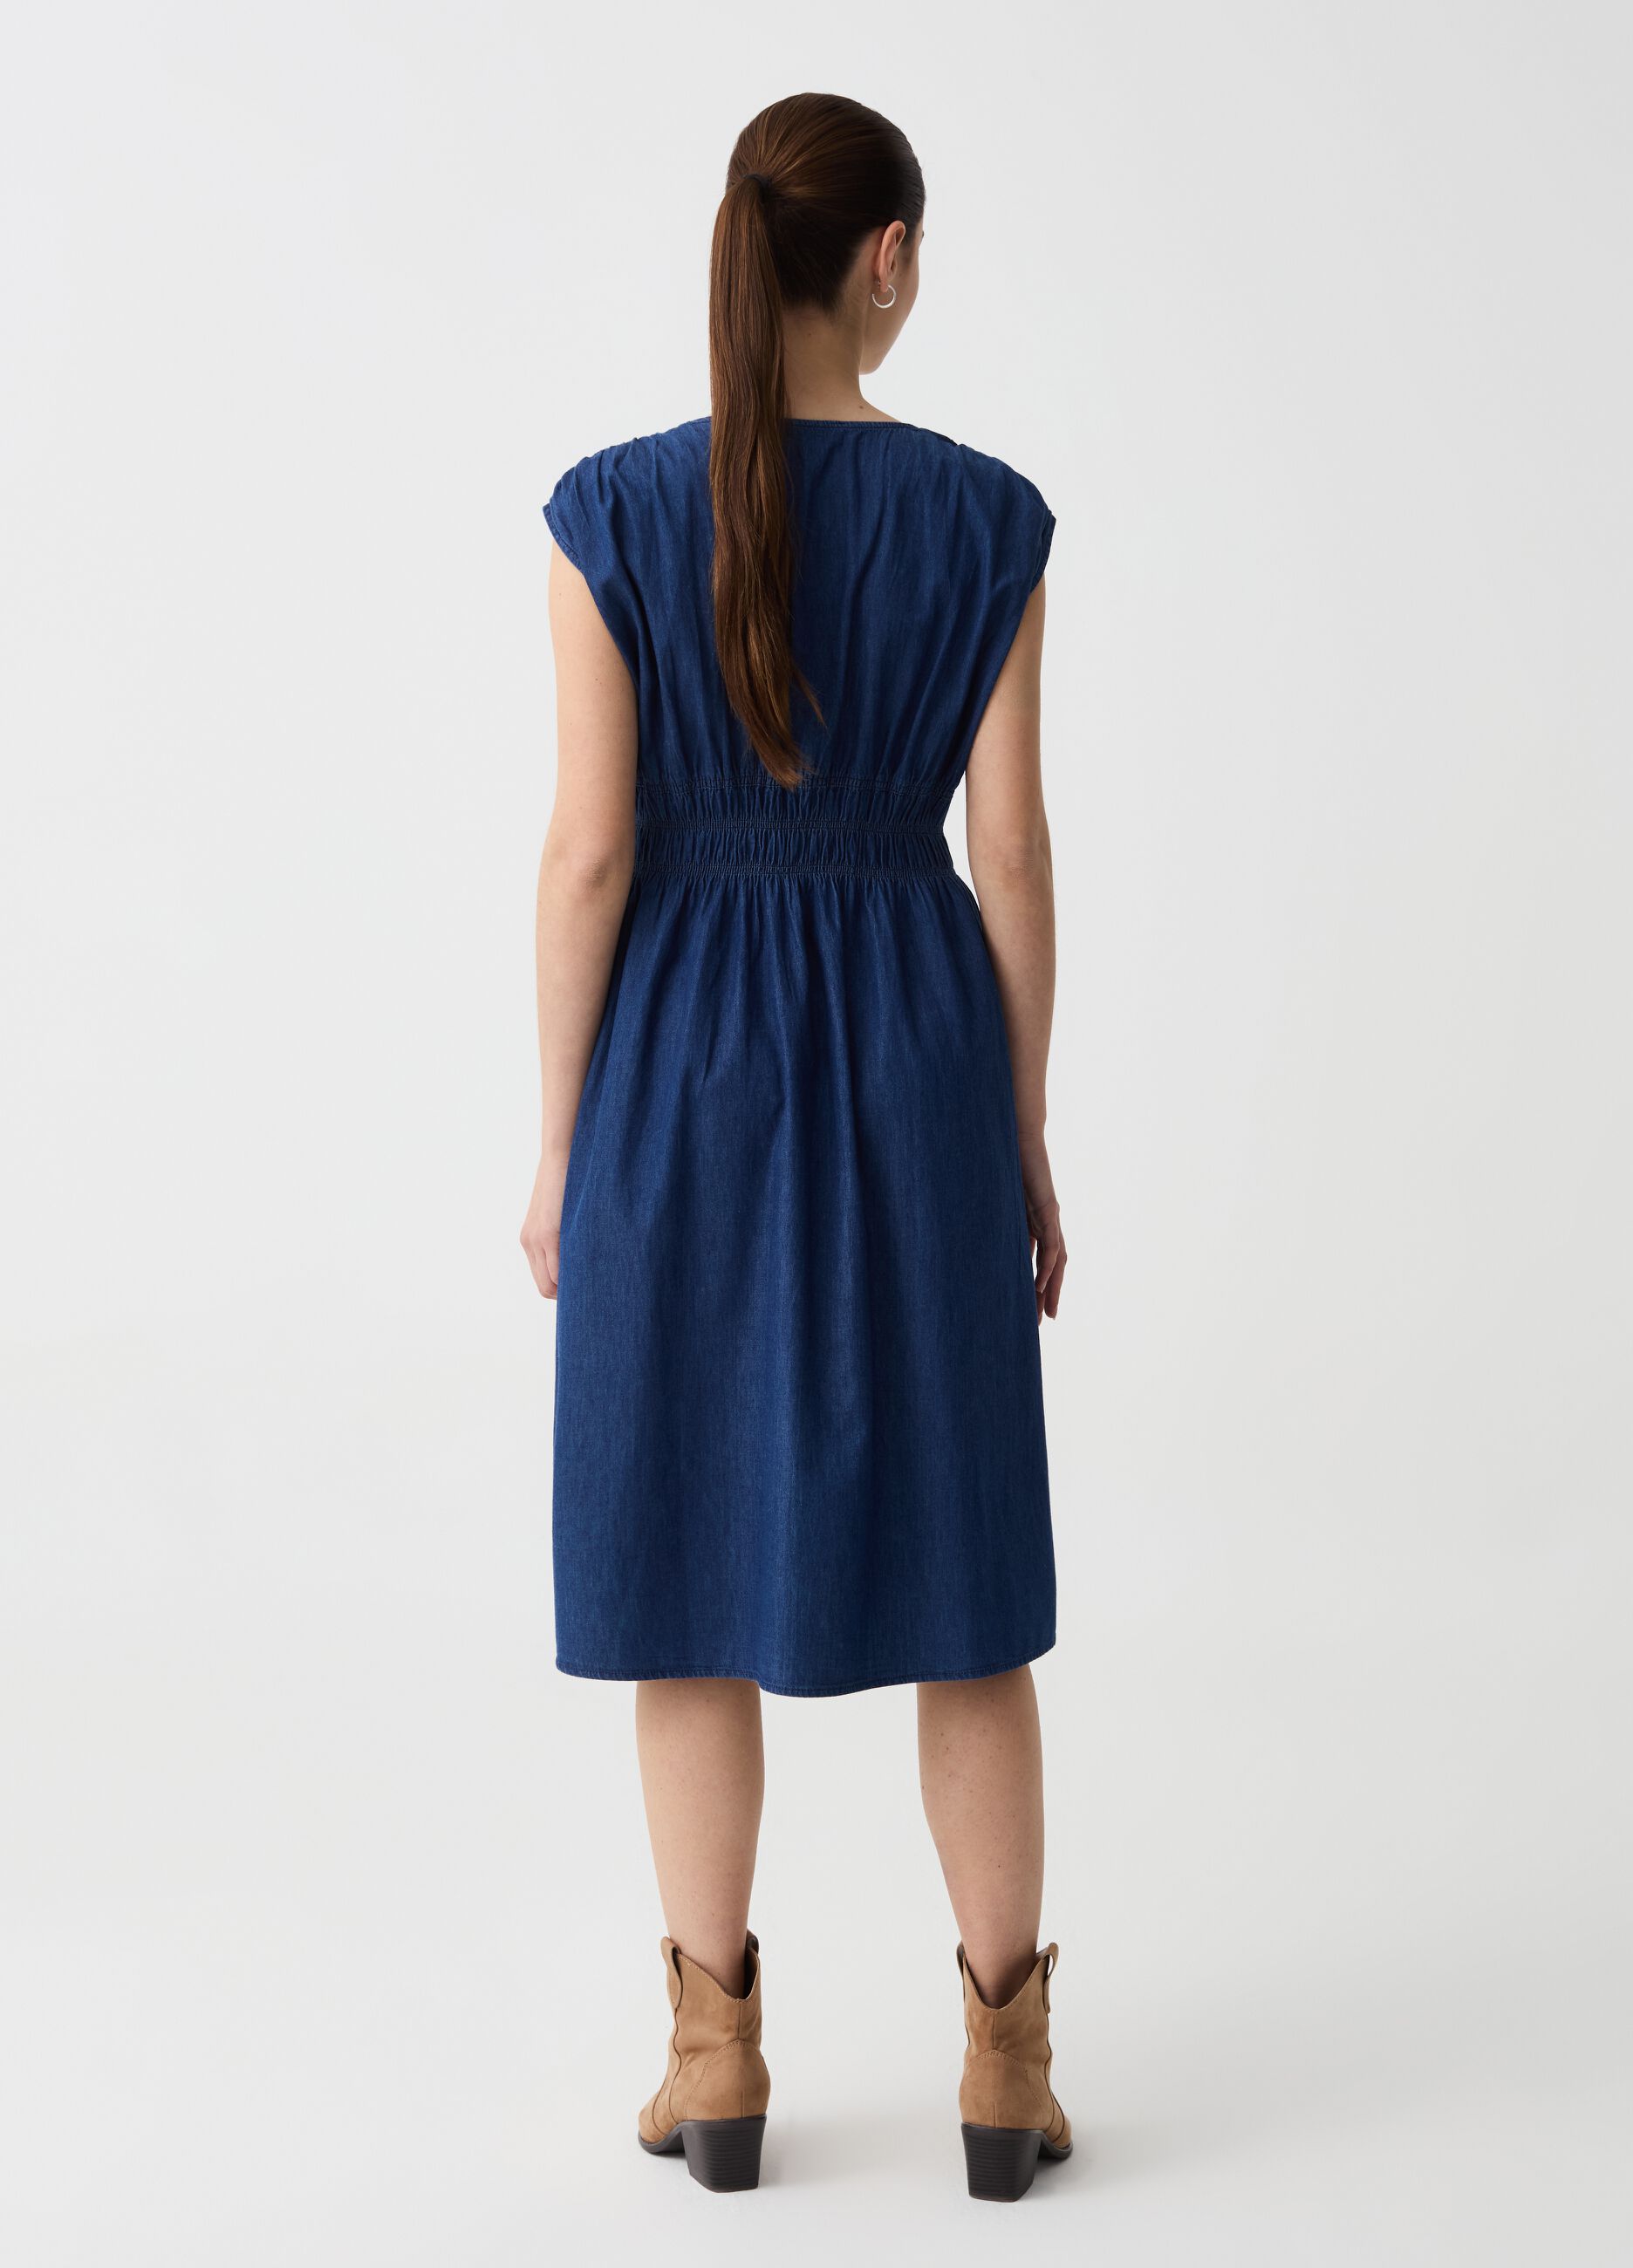 Denim midi dress with small buttons